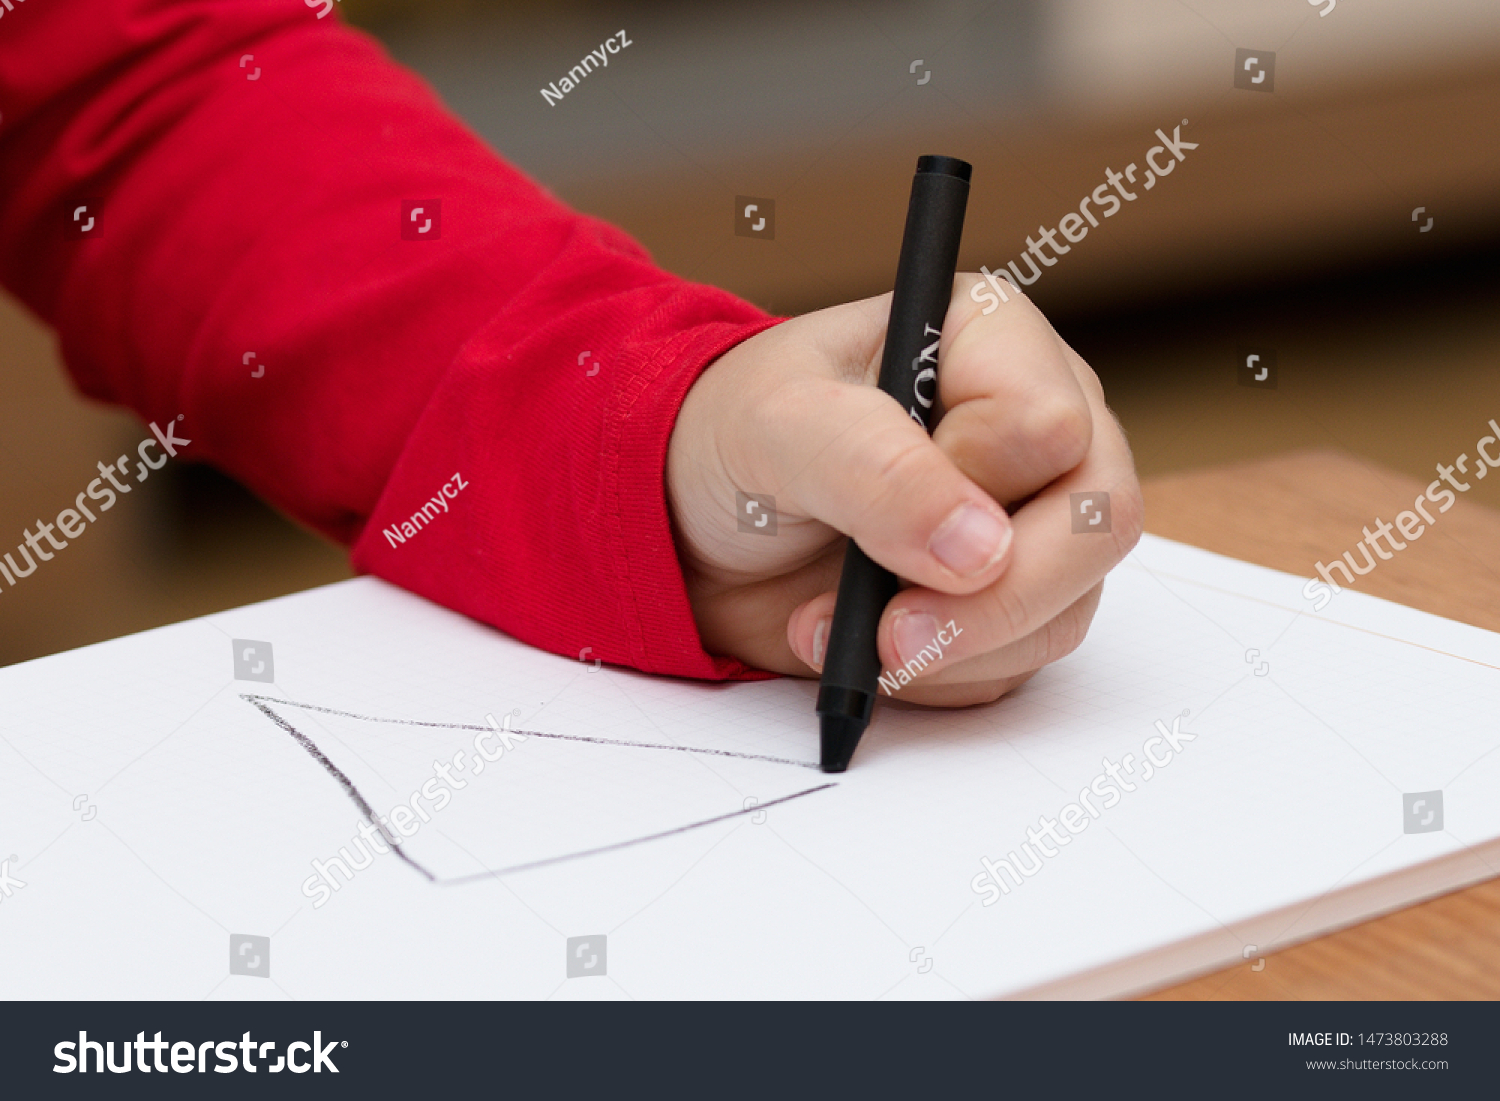 Left hand of a child drawing on white paper using black crayon #1473803288